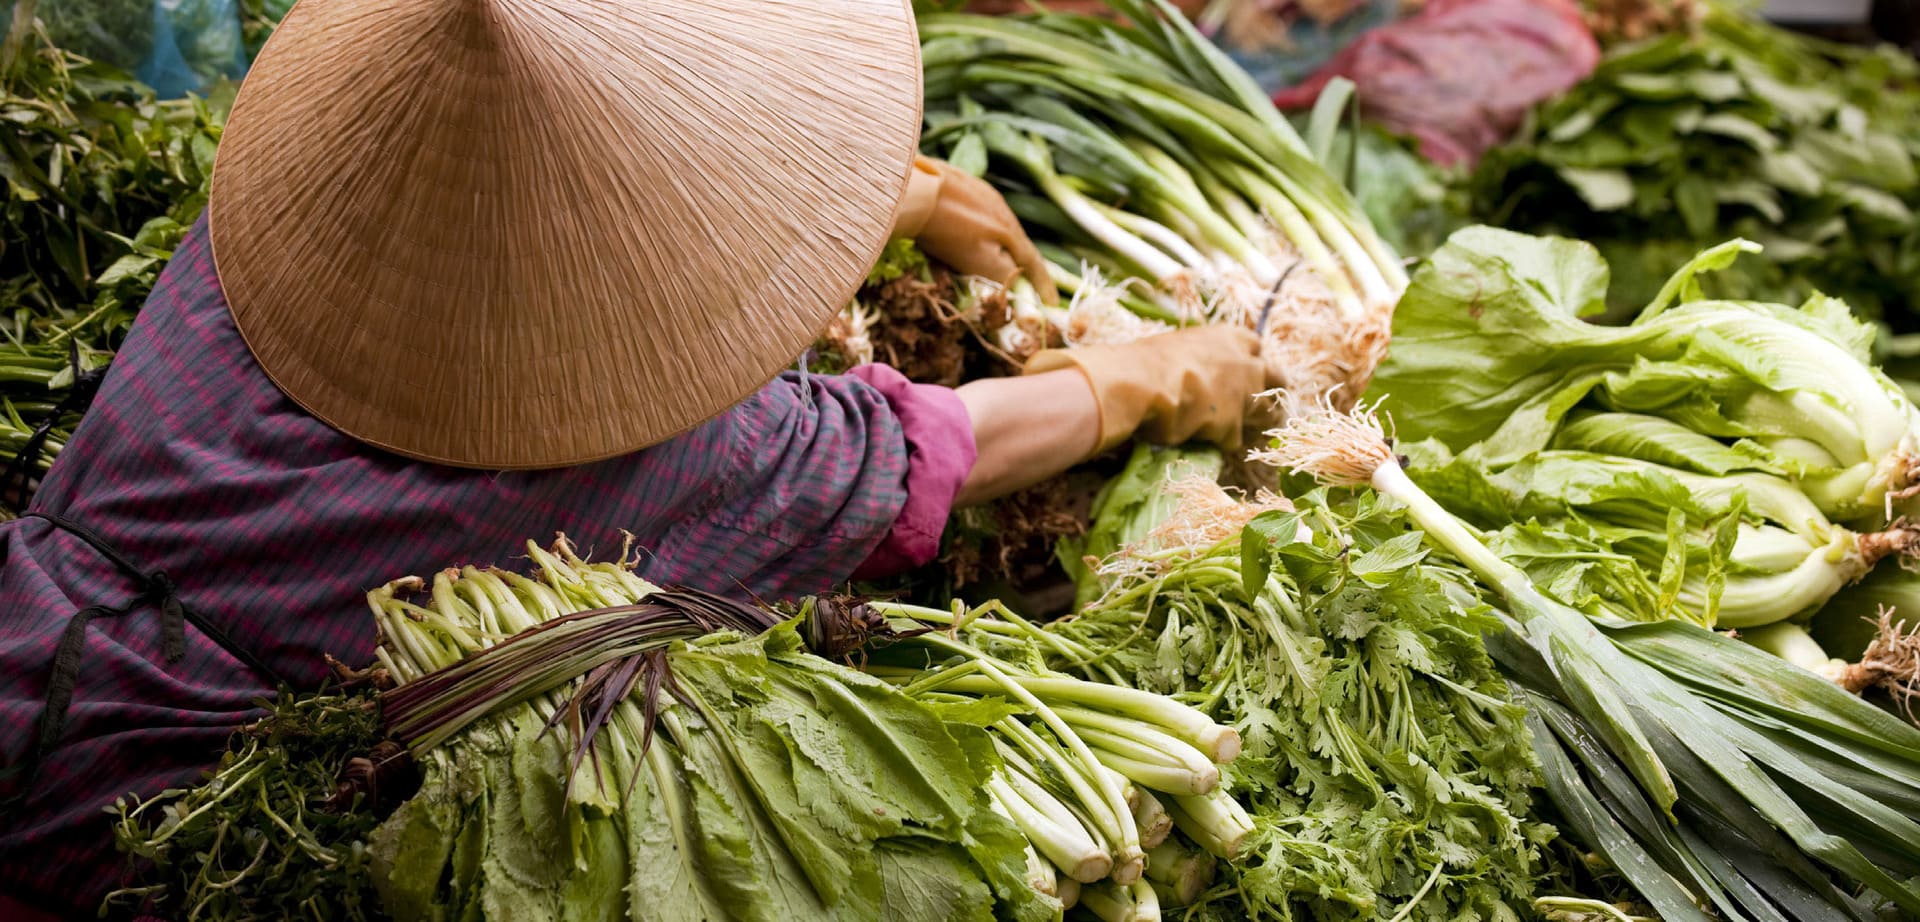 The Future of Food in Asia and Its Impact on People & Planet